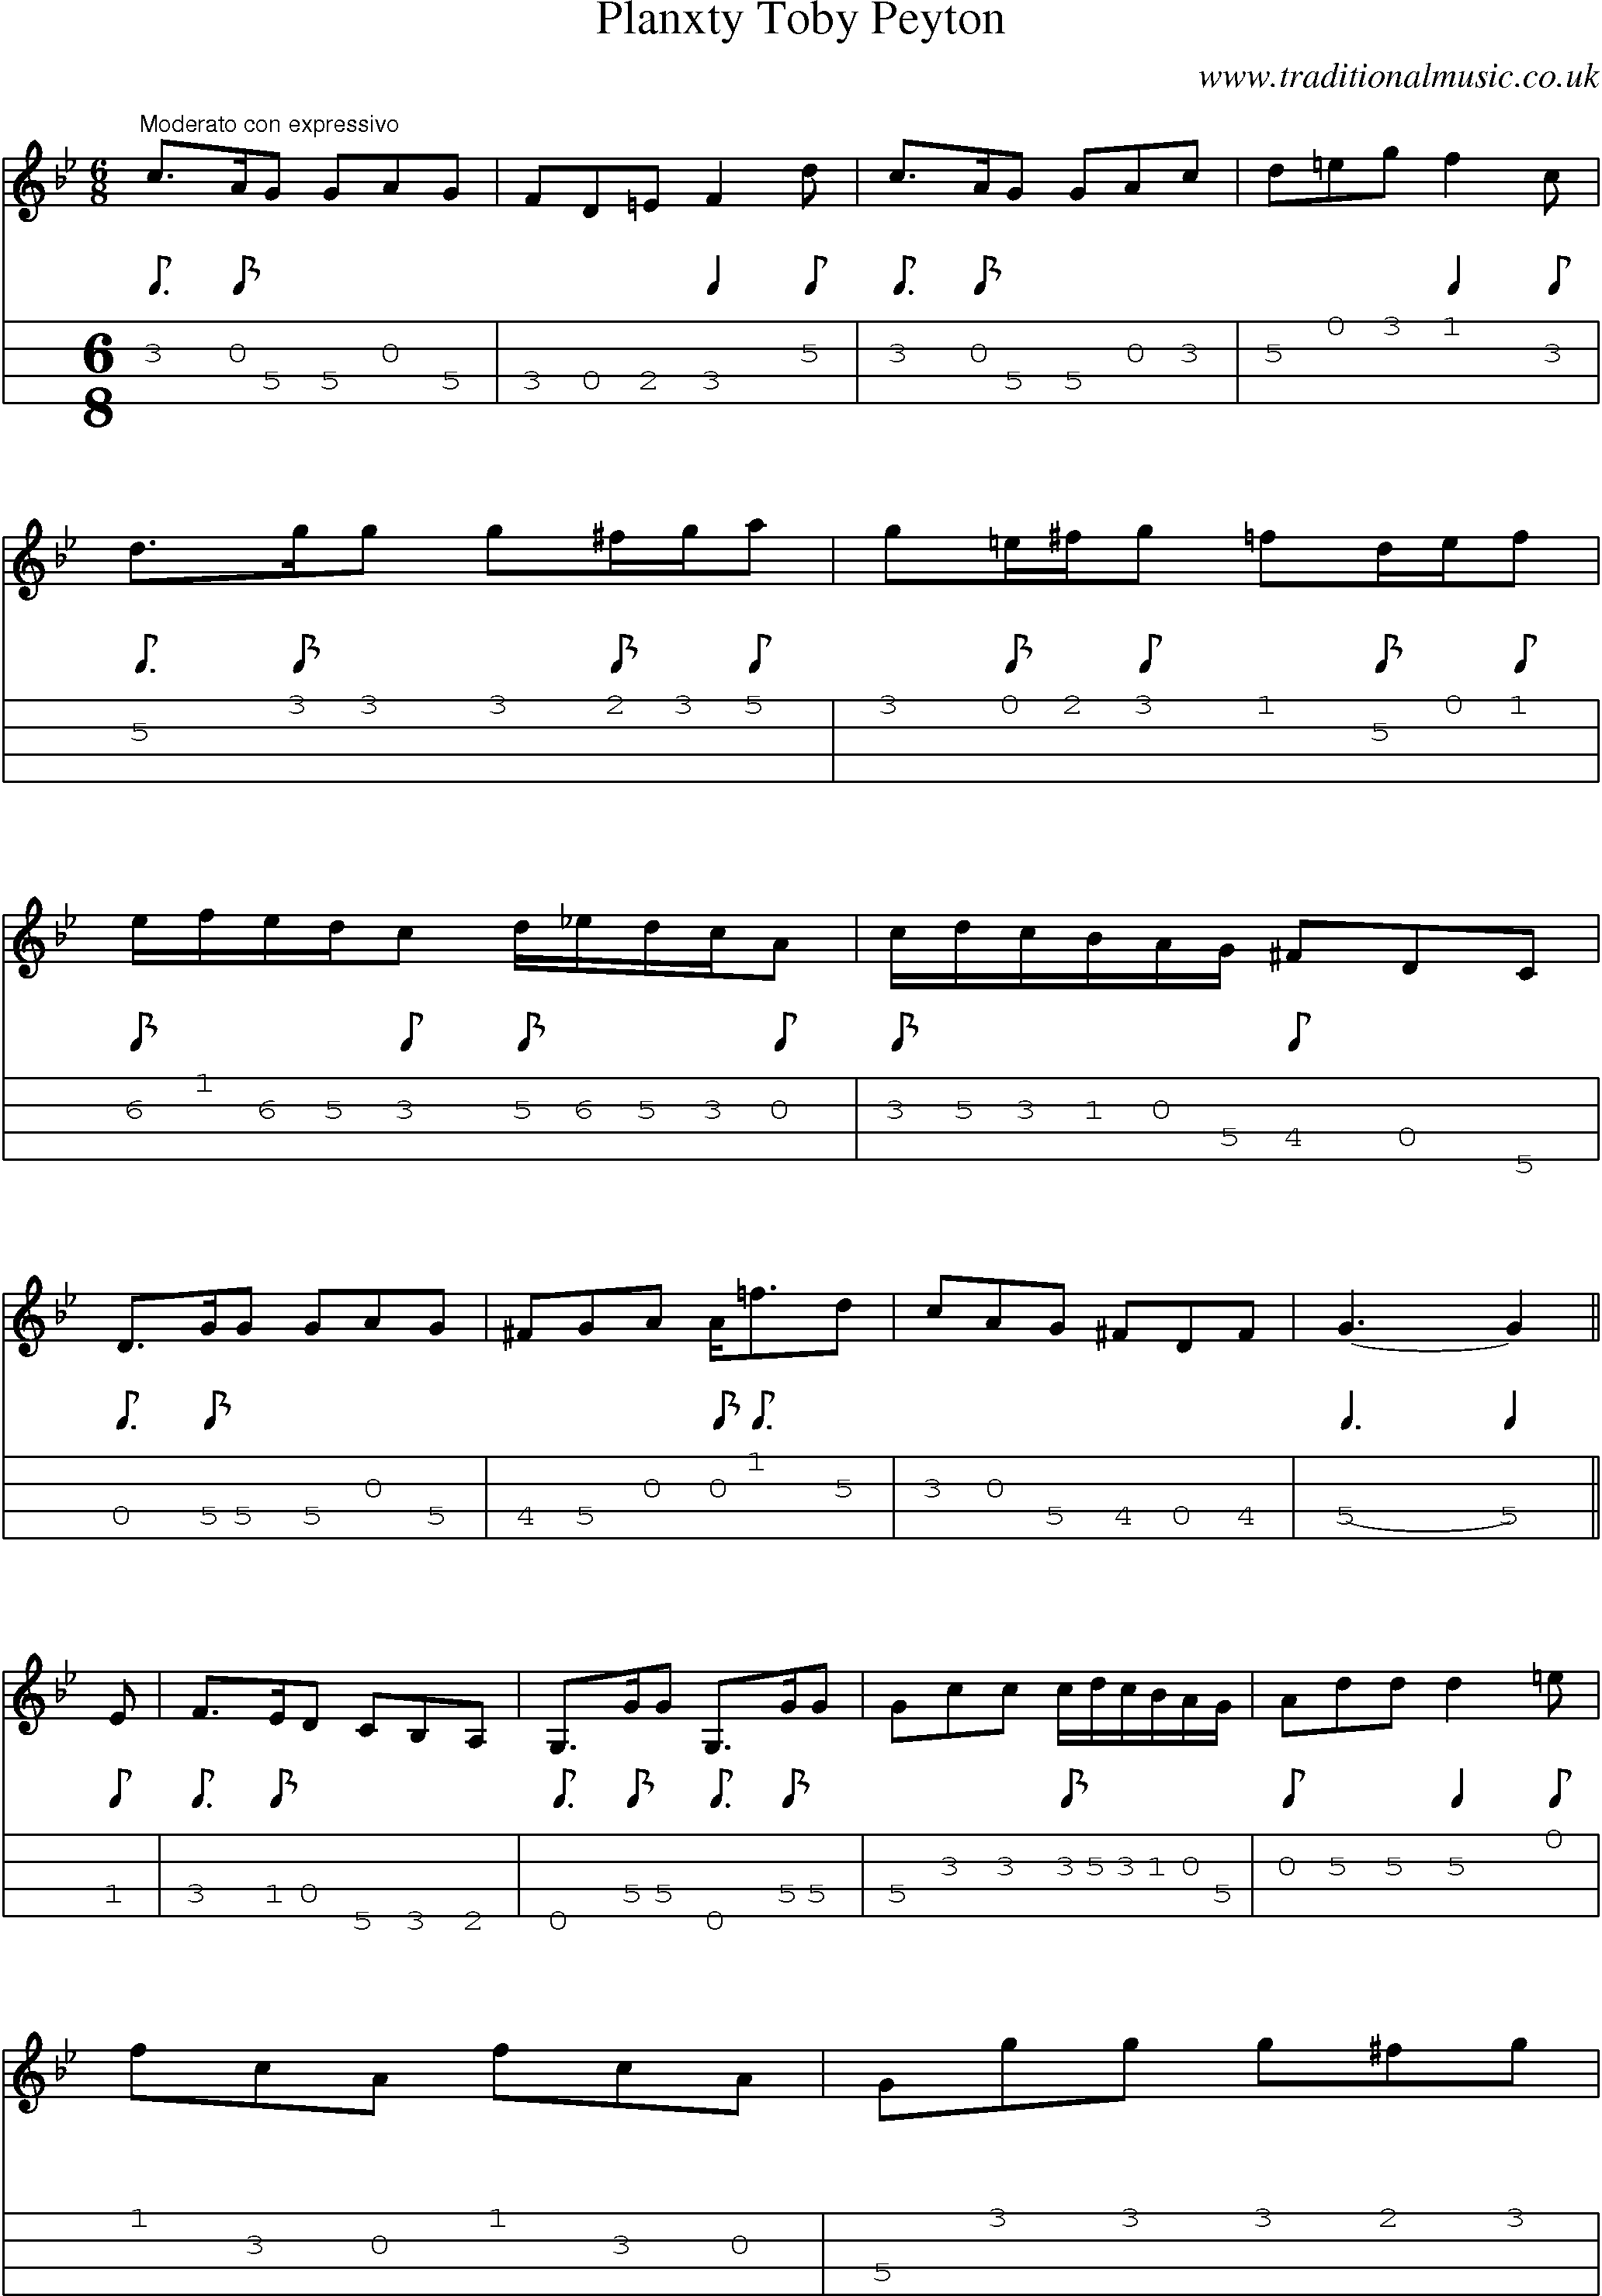 Music Score and Mandolin Tabs for Planxty Toby Peyton